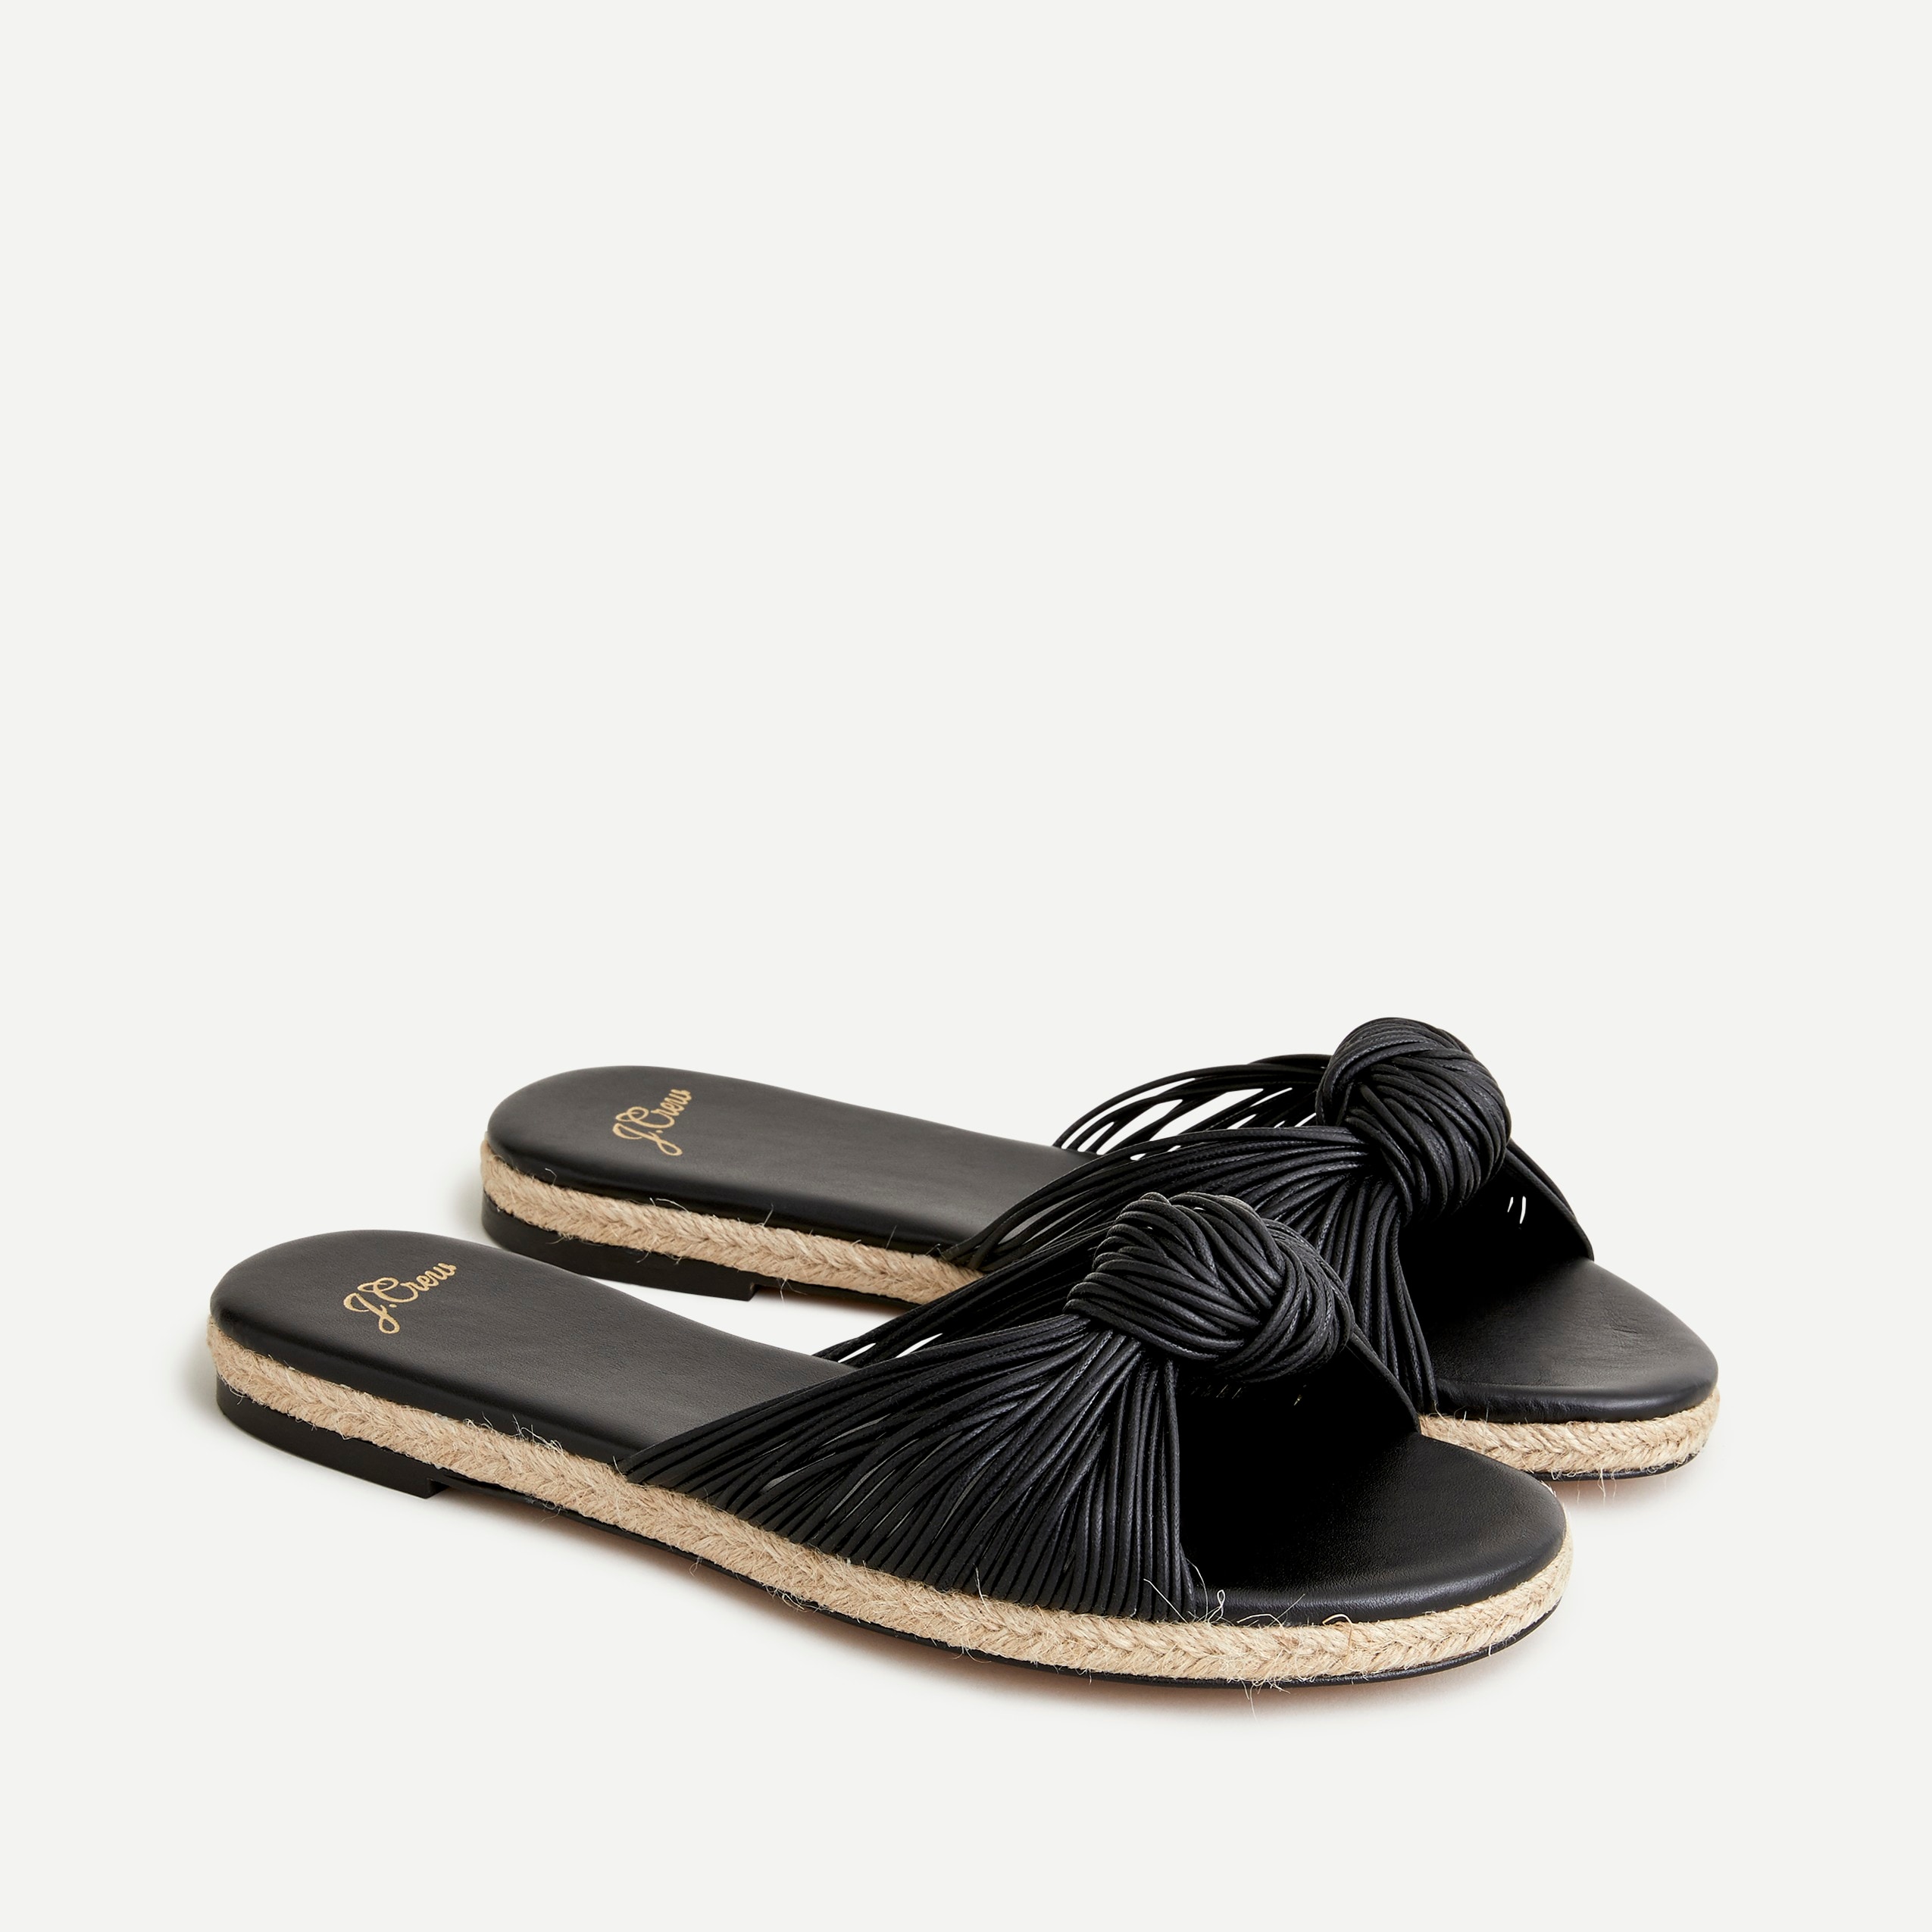 J.Crew: Knotted Slide Sandals For Women